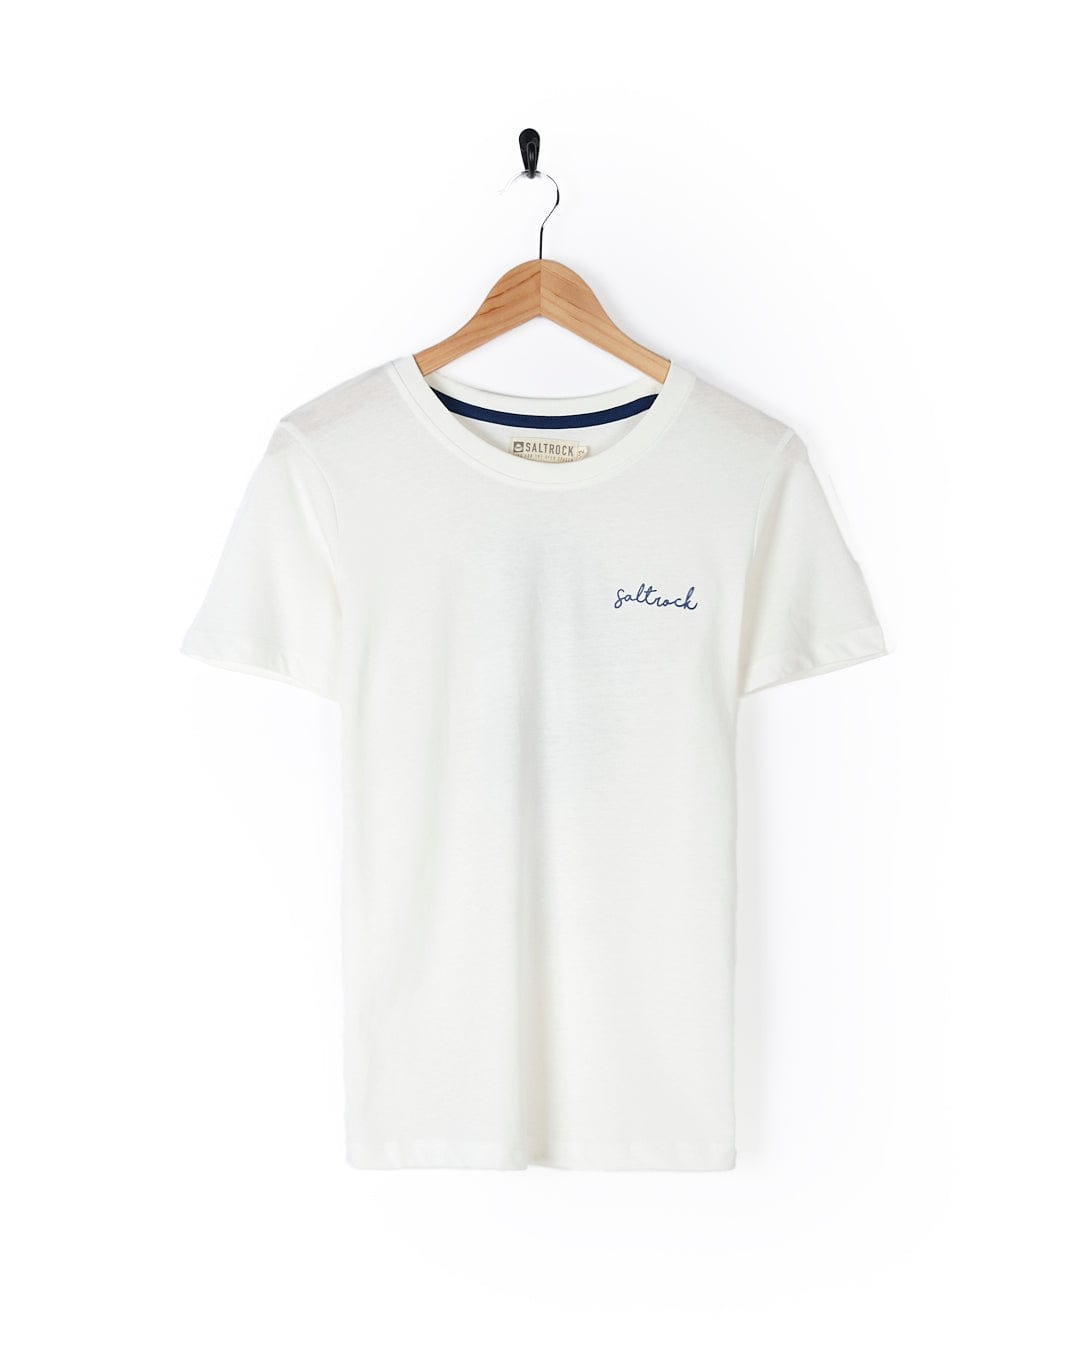 A Happiness Velator - Womens T-Shirt - White with a blue logo on it by Saltrock.